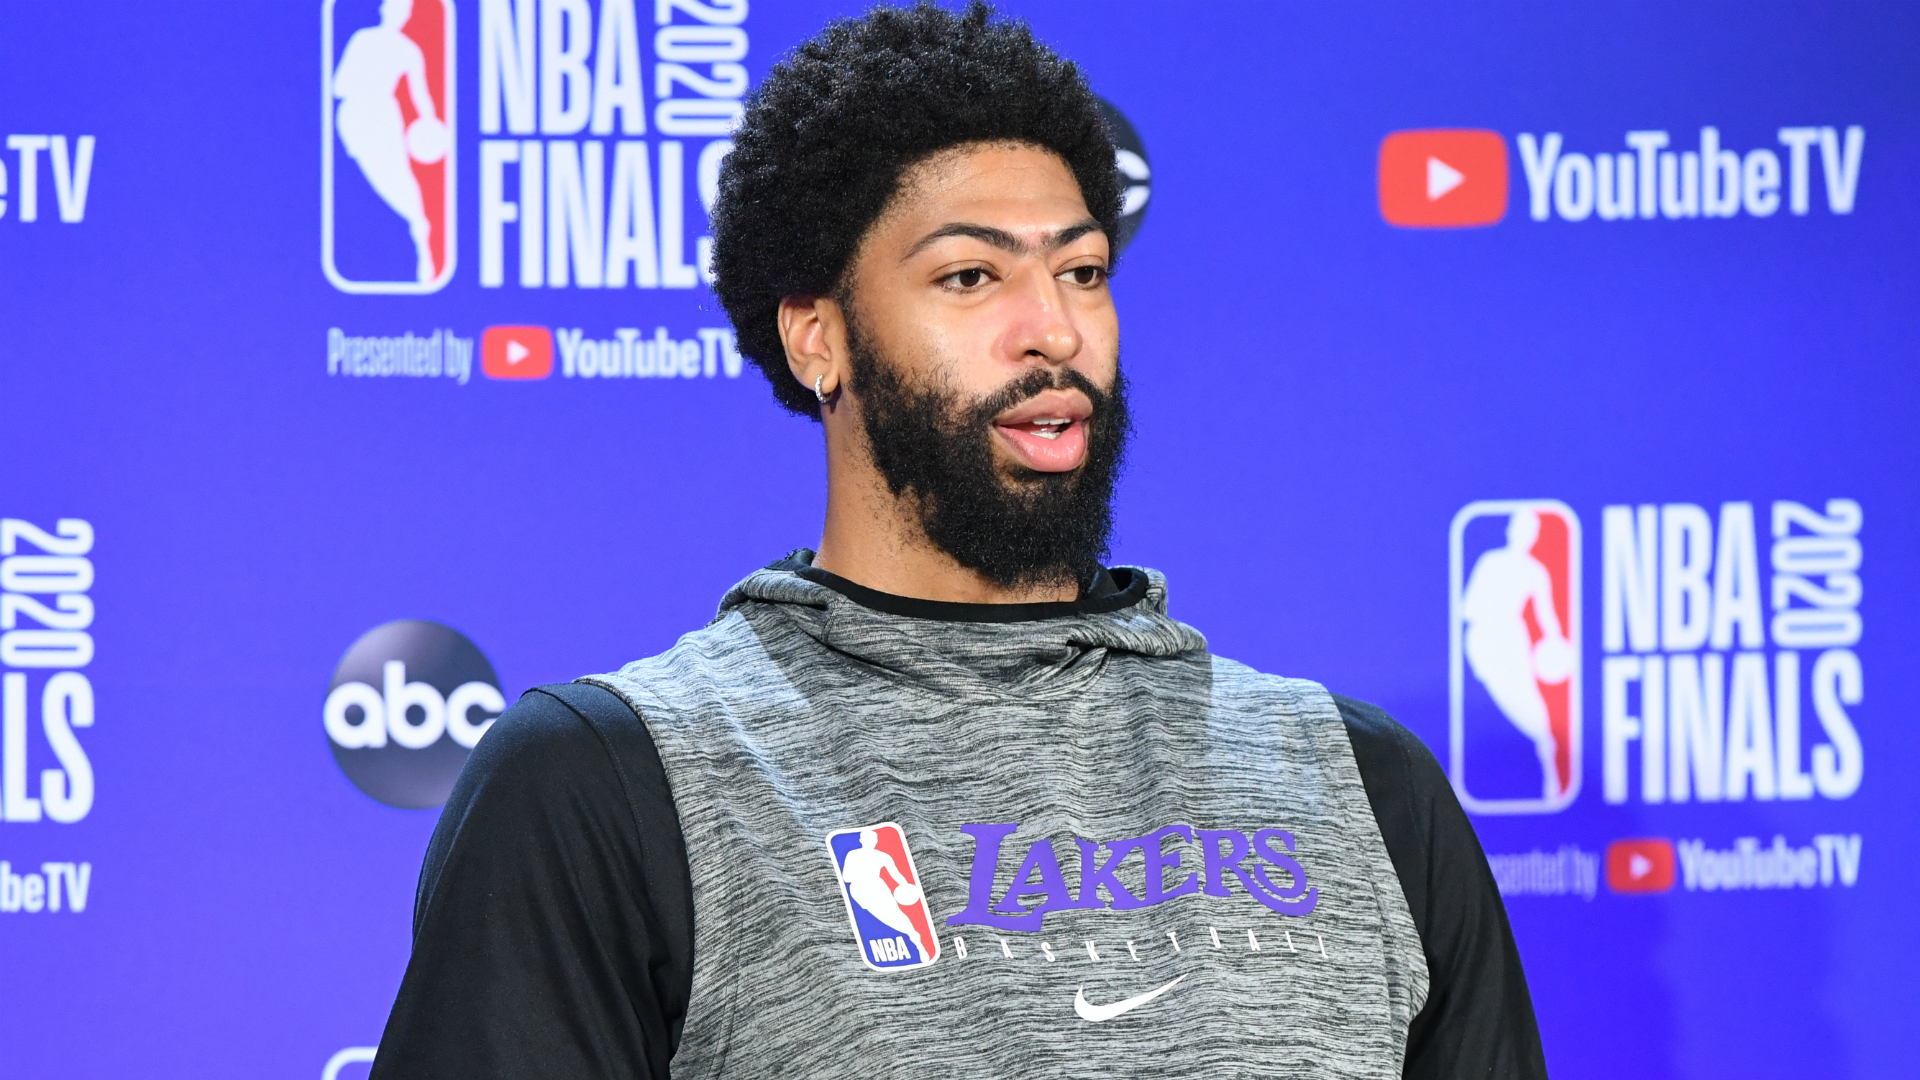 Anthony Davis previewed the Los Angeles Lakers' NBA Finals showdown against the Miami Heat, which starts on Wednesday.